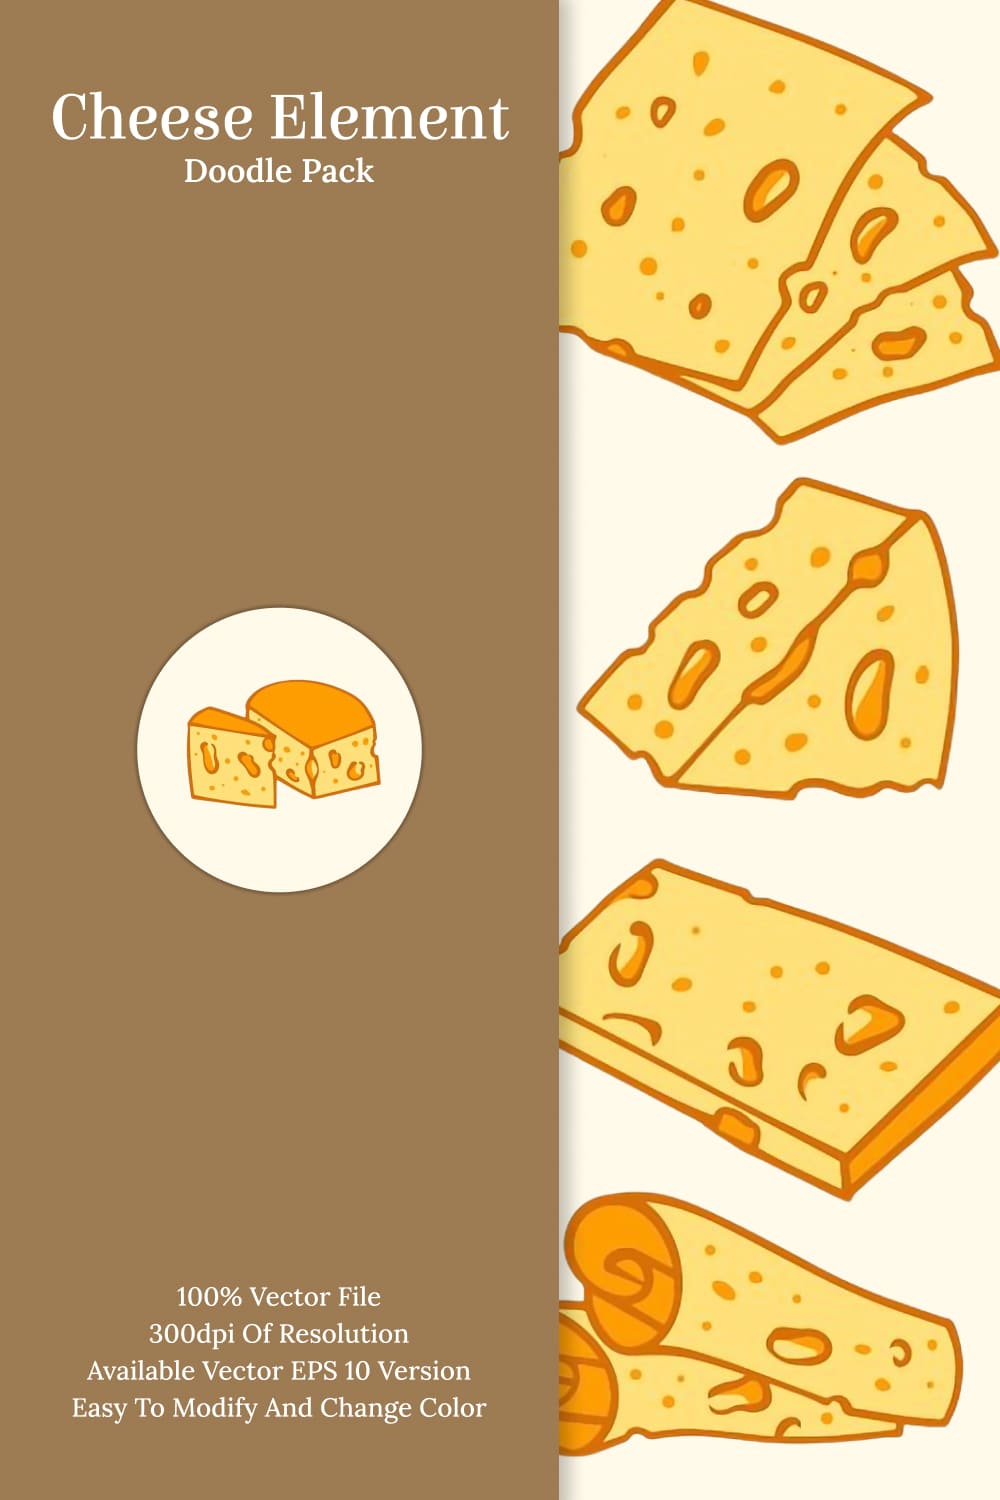 Cheese element doodle pack - pinterest image preview.